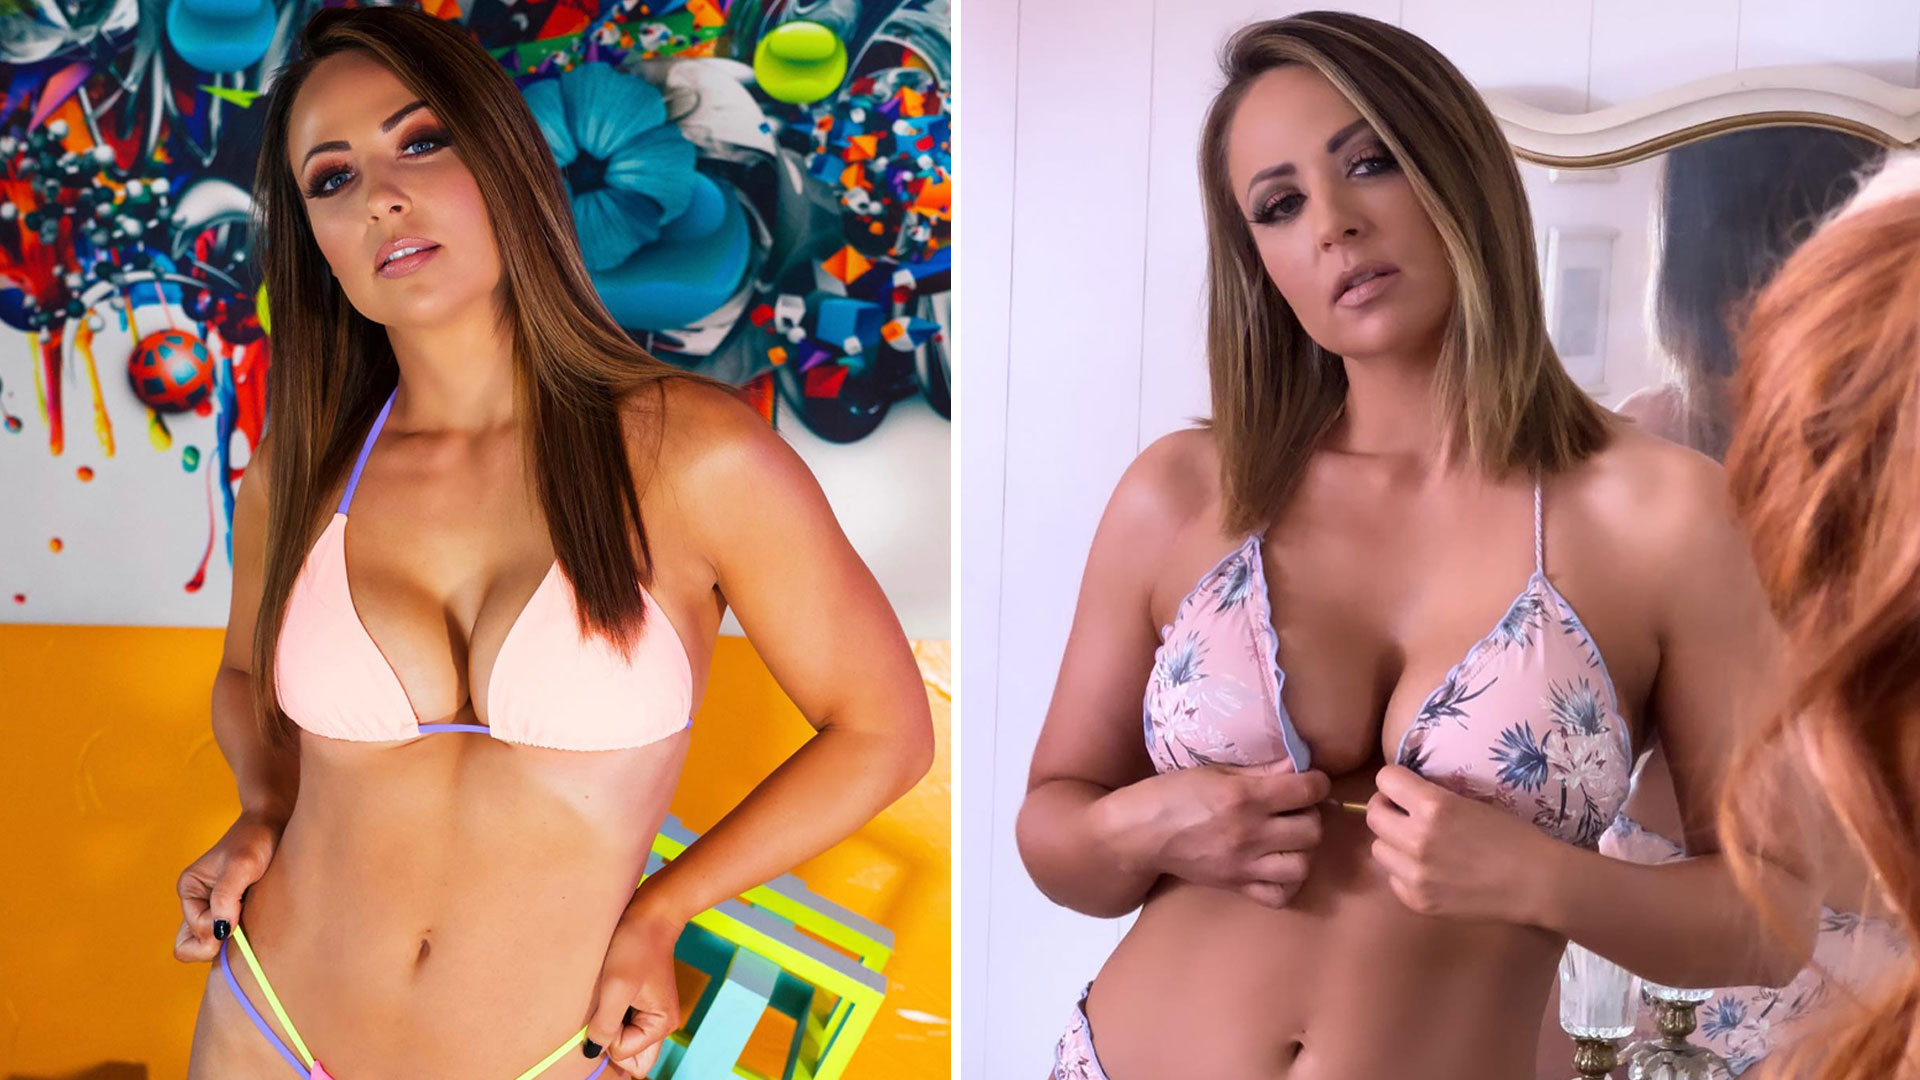 dawn marie snyder recommends wwe emma nude pics pic